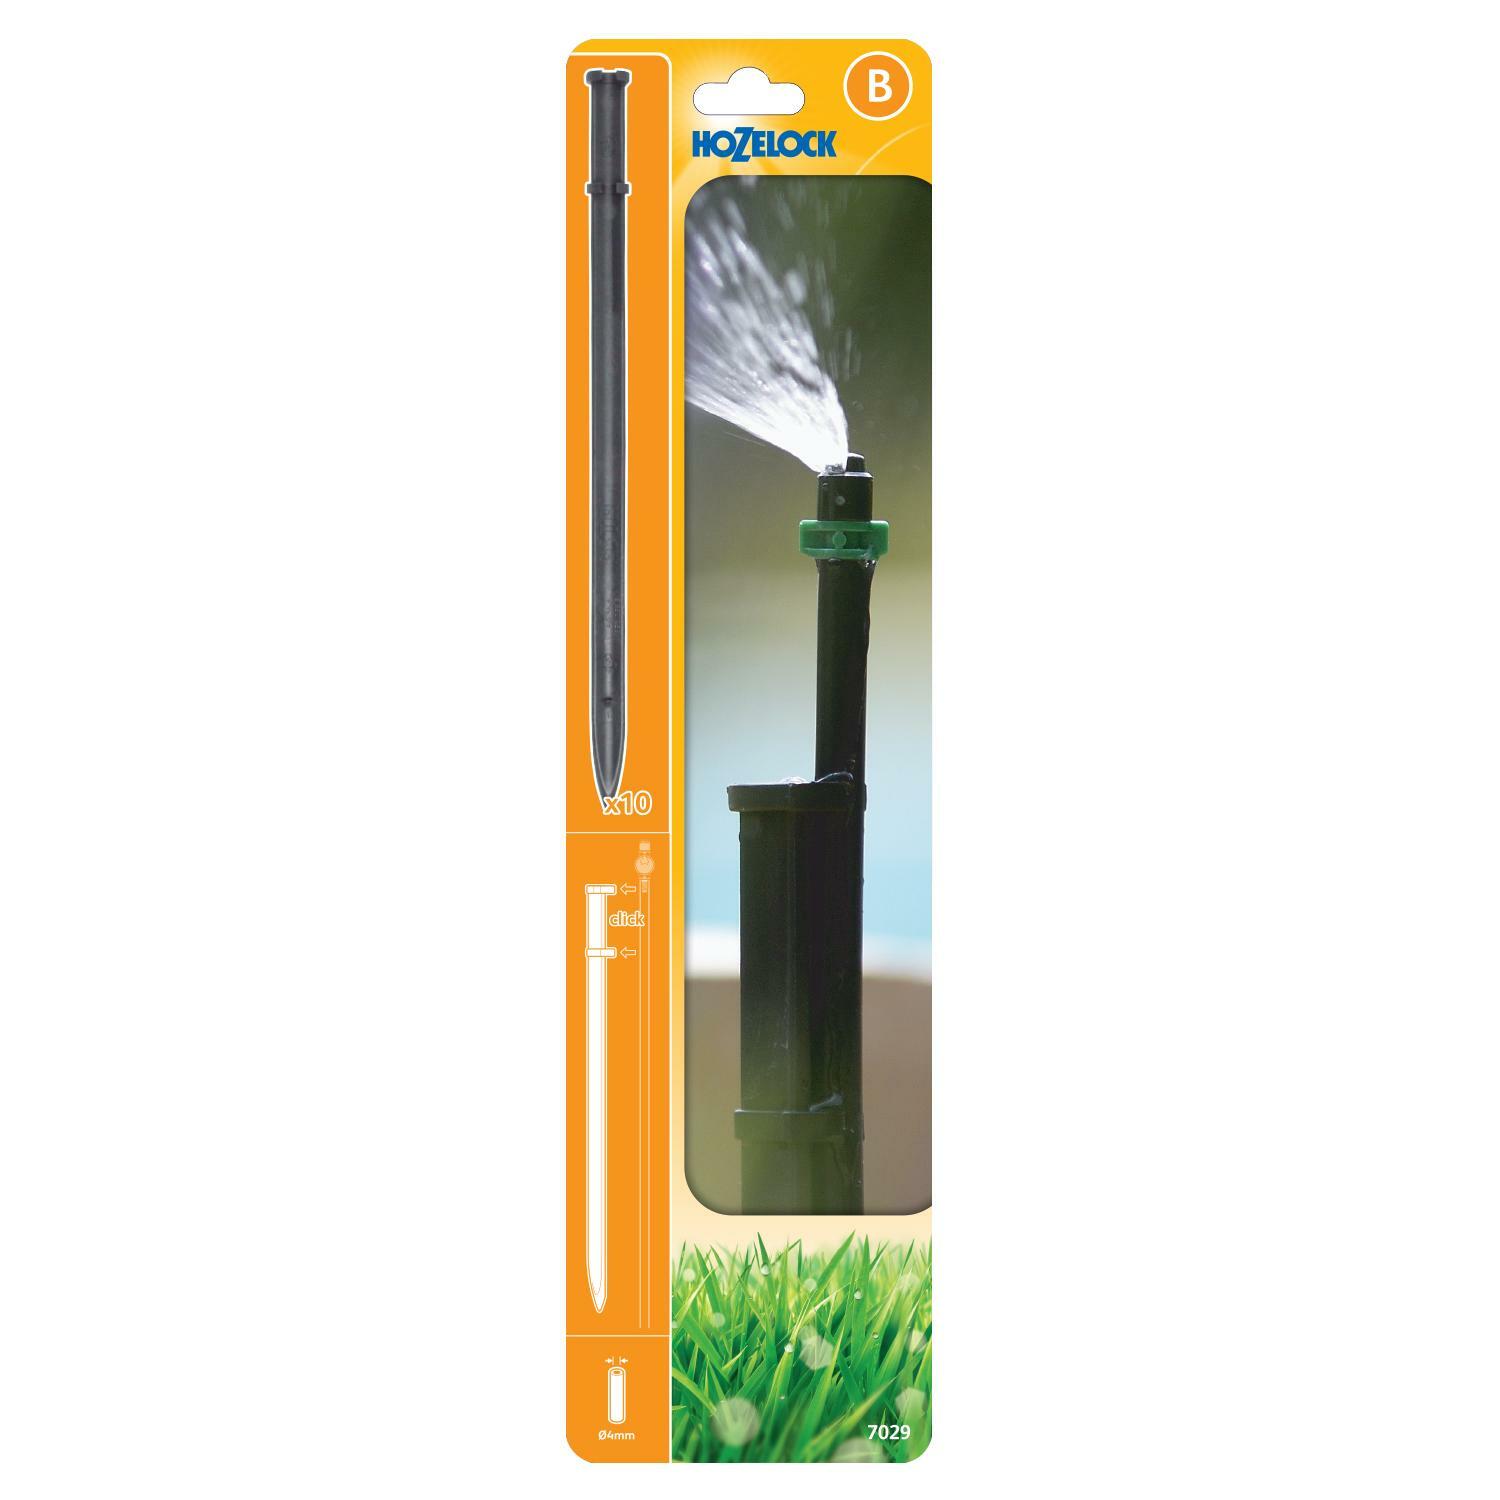 30302 000 Hozelock Pack 7029 Micro Sprinker Support Stake 115X447 Hd 1 Copy